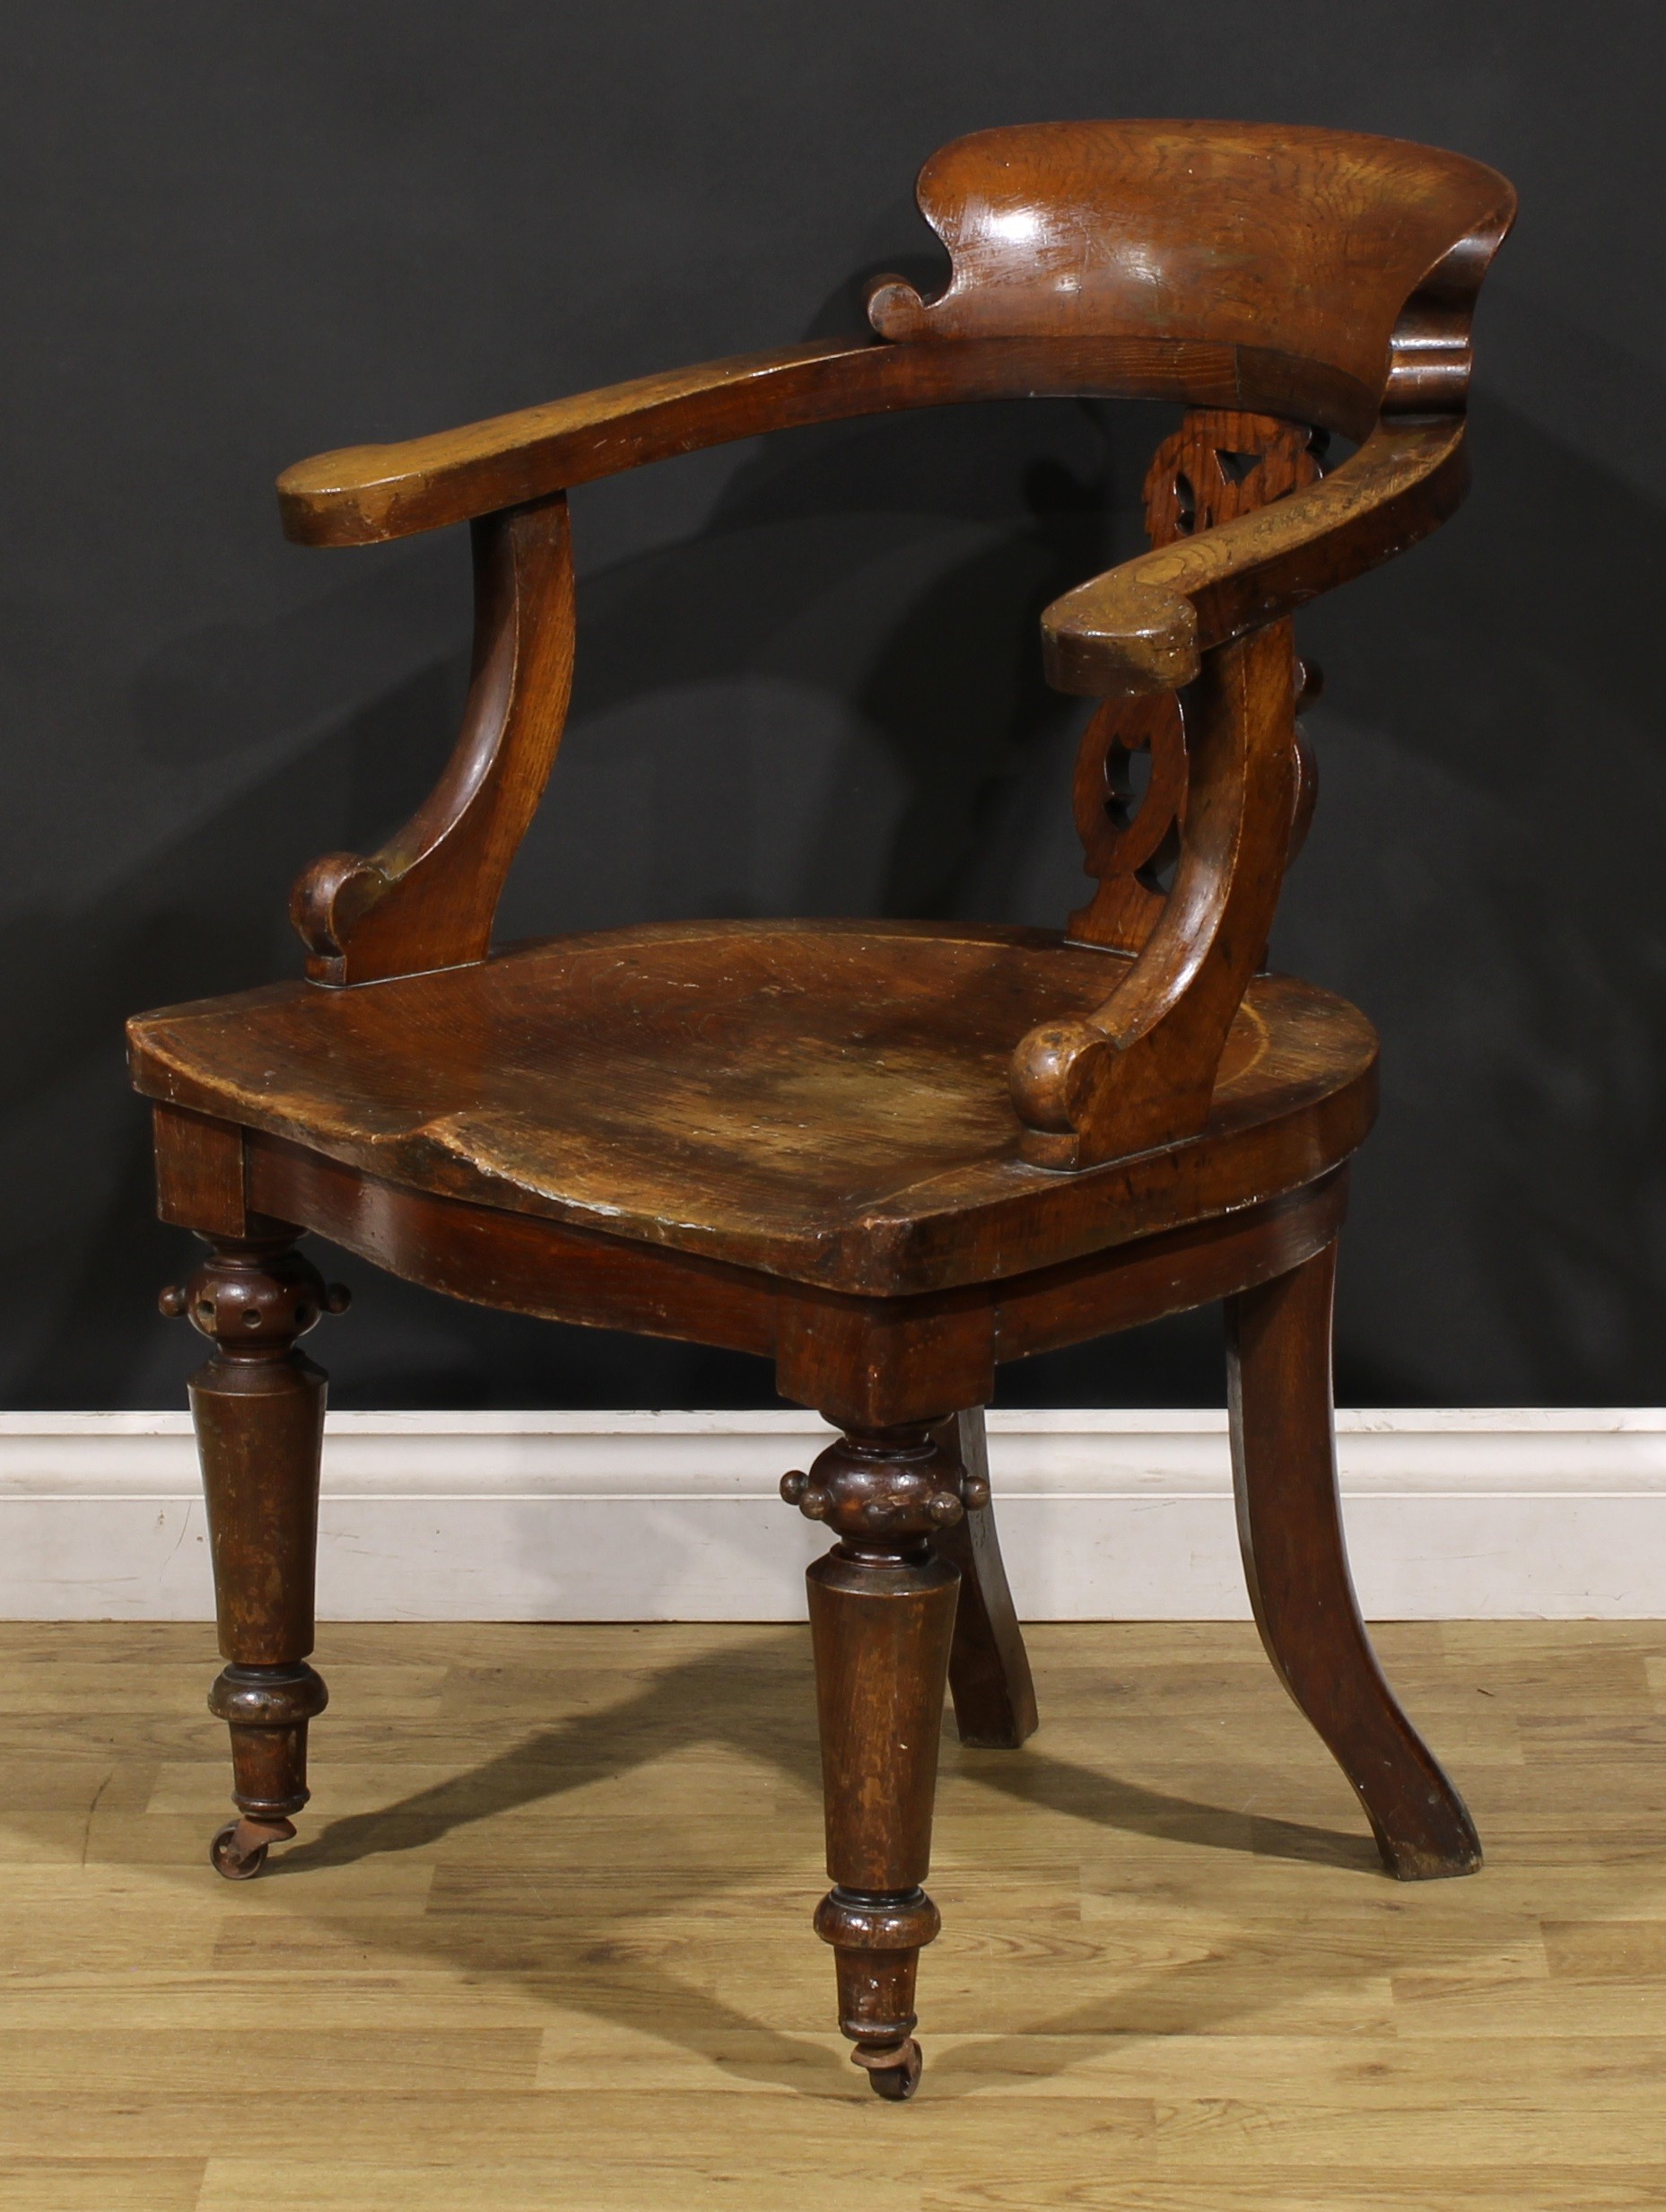 A Victorian oak desk chair, by Thomas Simpson & Sons, Halifax, Yorkshire (fl.1876-1954), badged, - Image 3 of 4